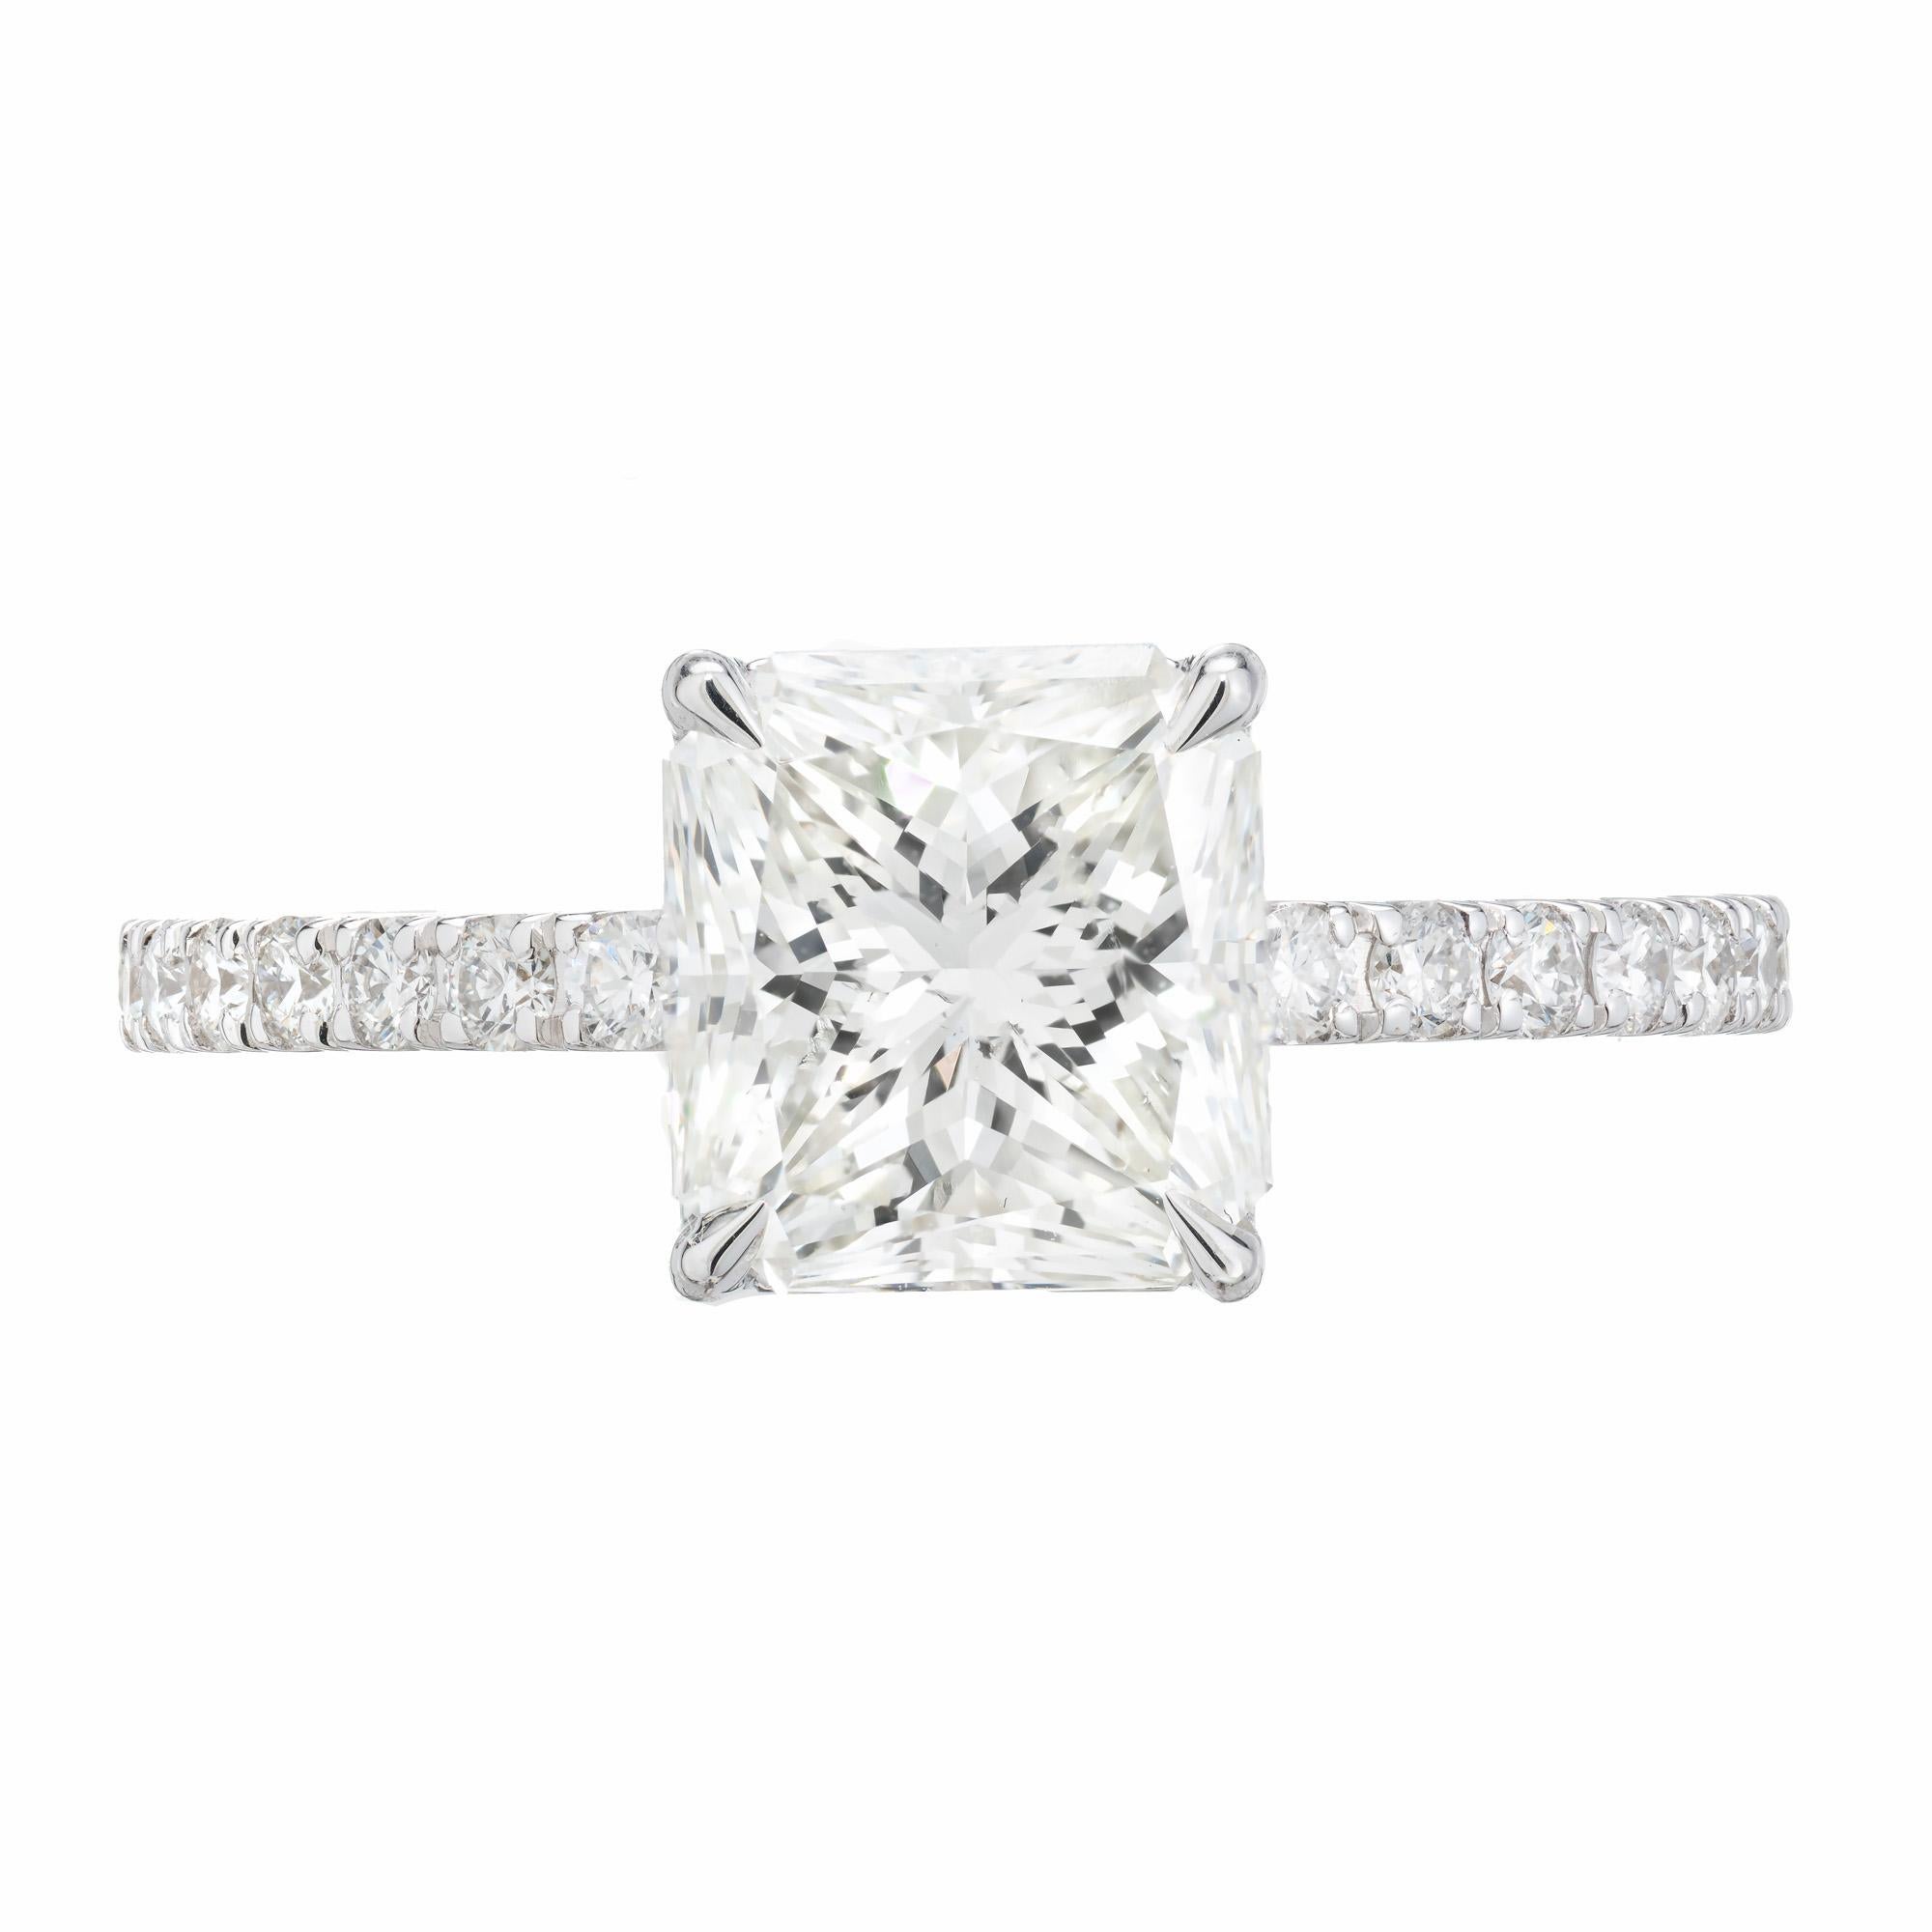 Simple elegance. Radiant cut diamond engagement ring. This radiant brilliant cut 2.24ct diamond is mounted in a four prong 18k white gold setting. Accented with 22 round brilliant cut diamonds along each side of the shank. The center diamonds is